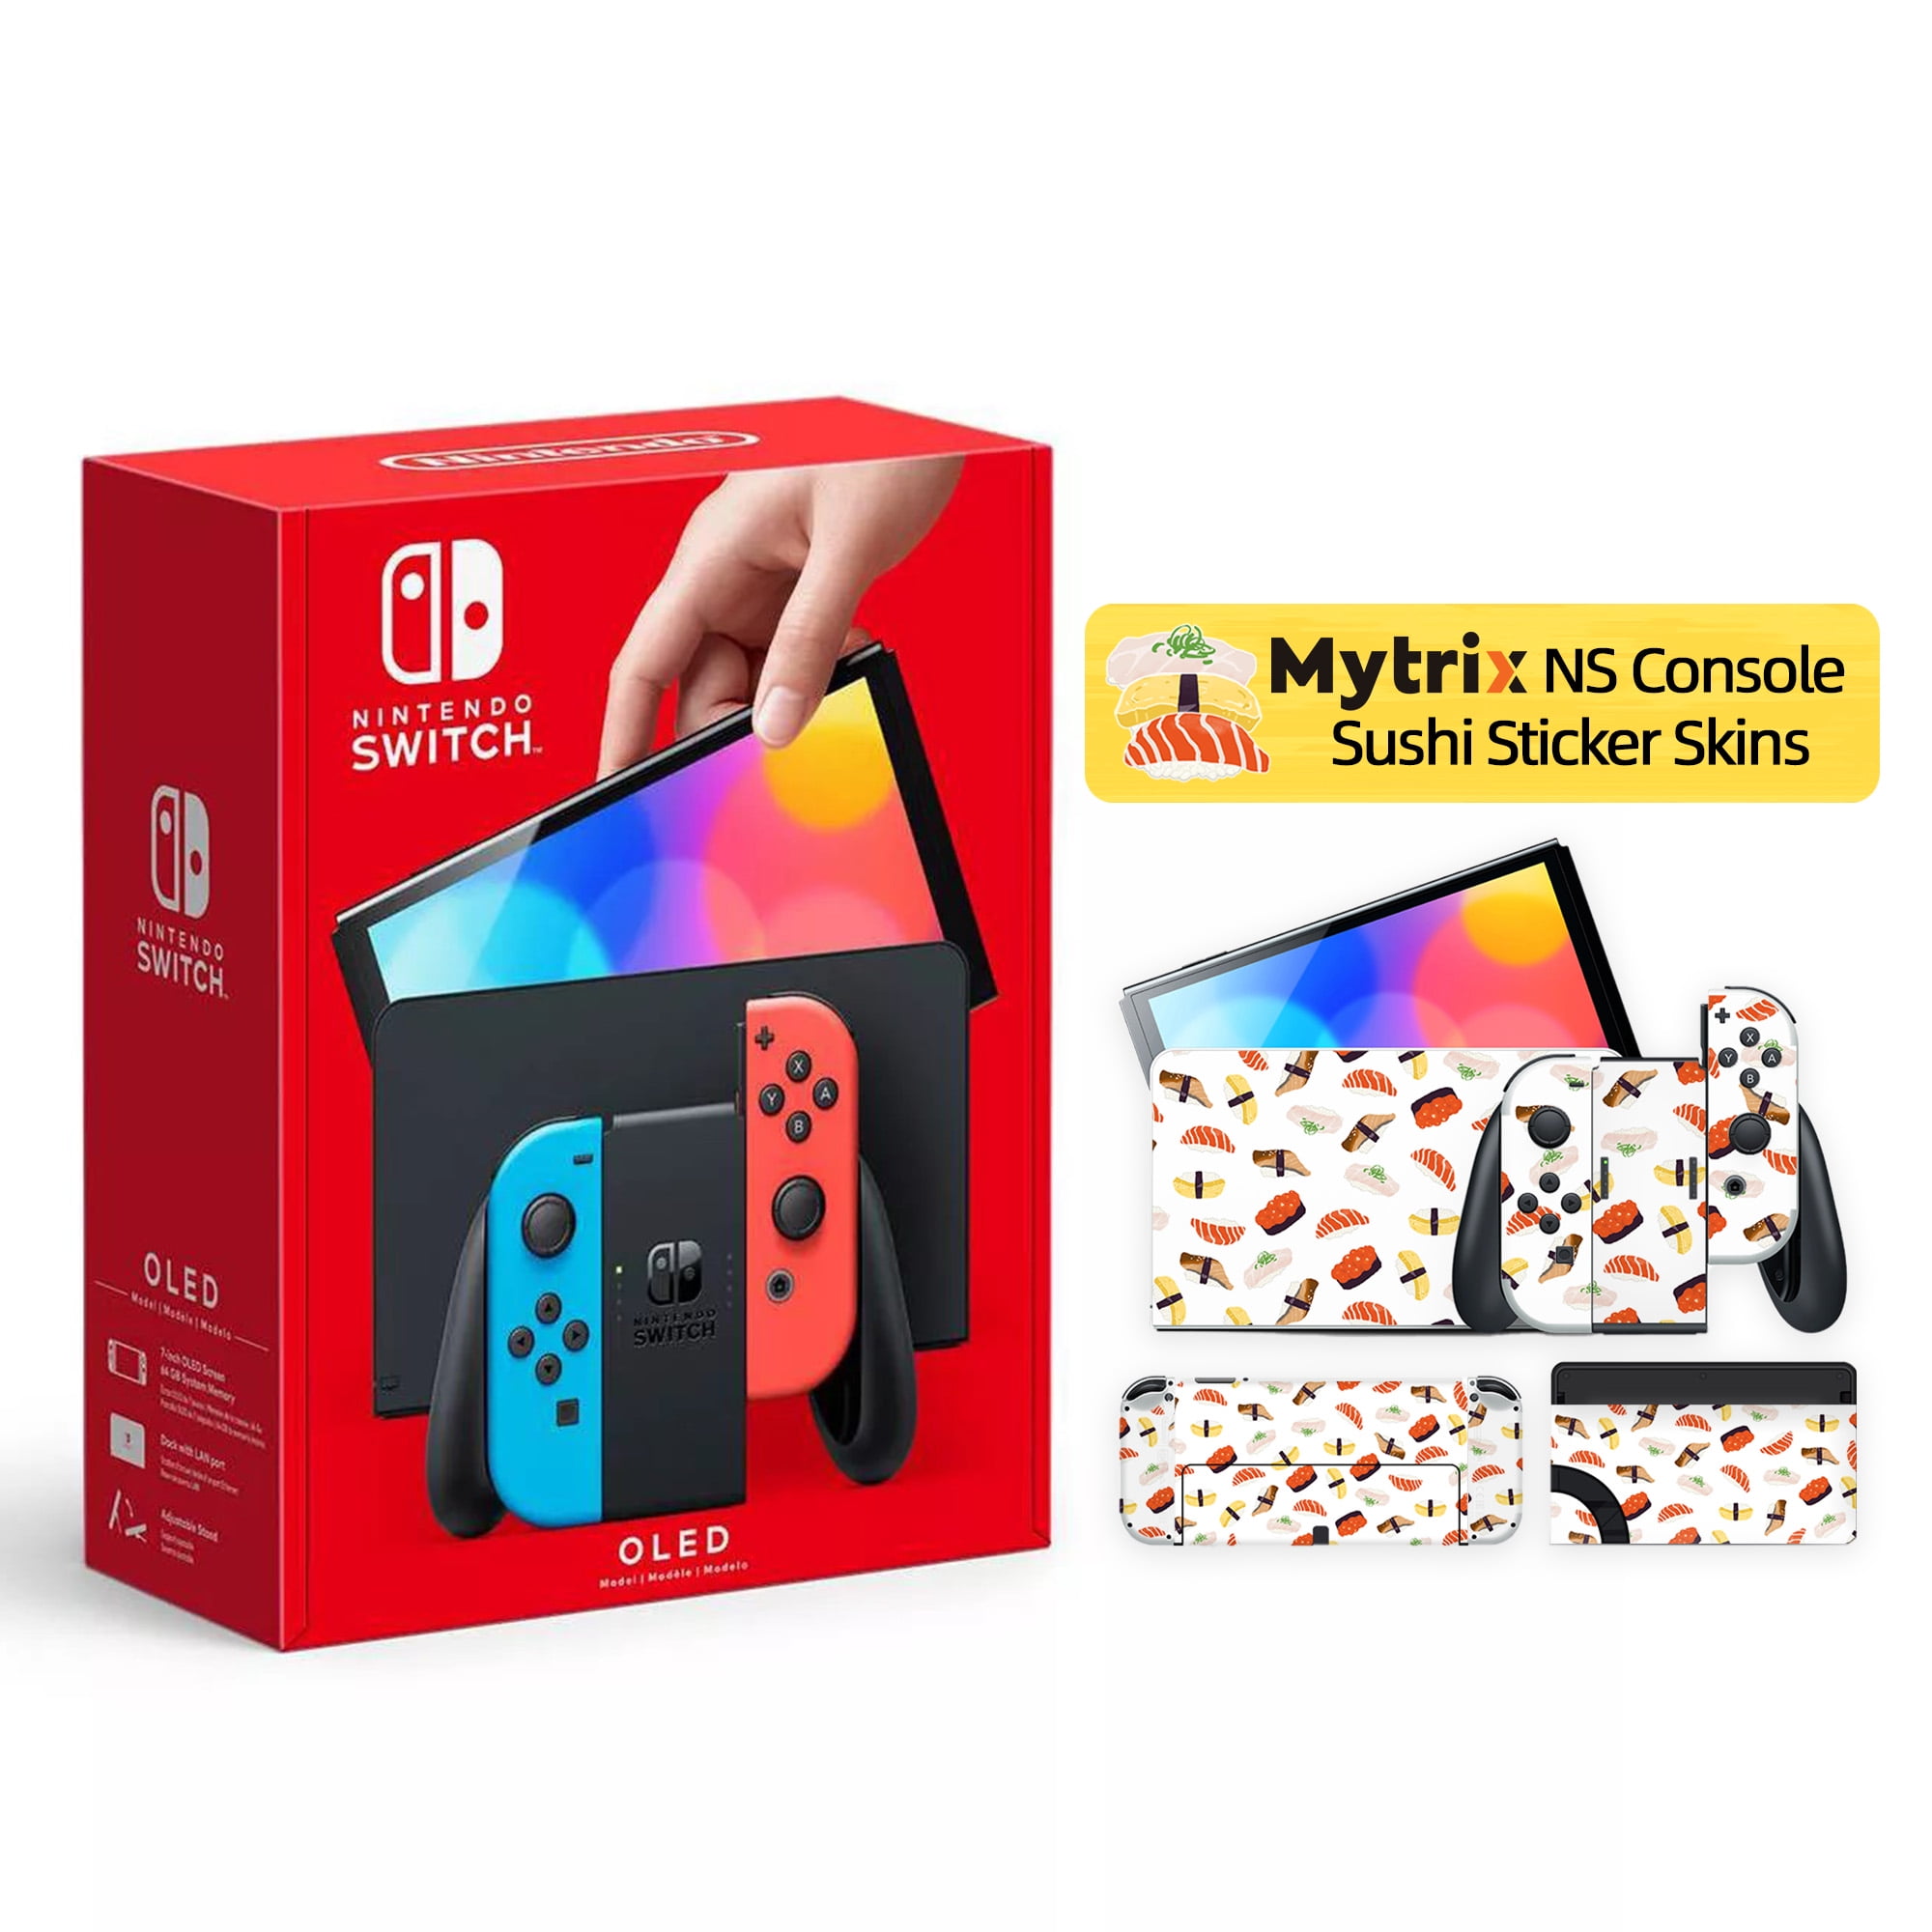 Nintendo Switch 2021 New OLED Model Neon Red Blue with Mytrix